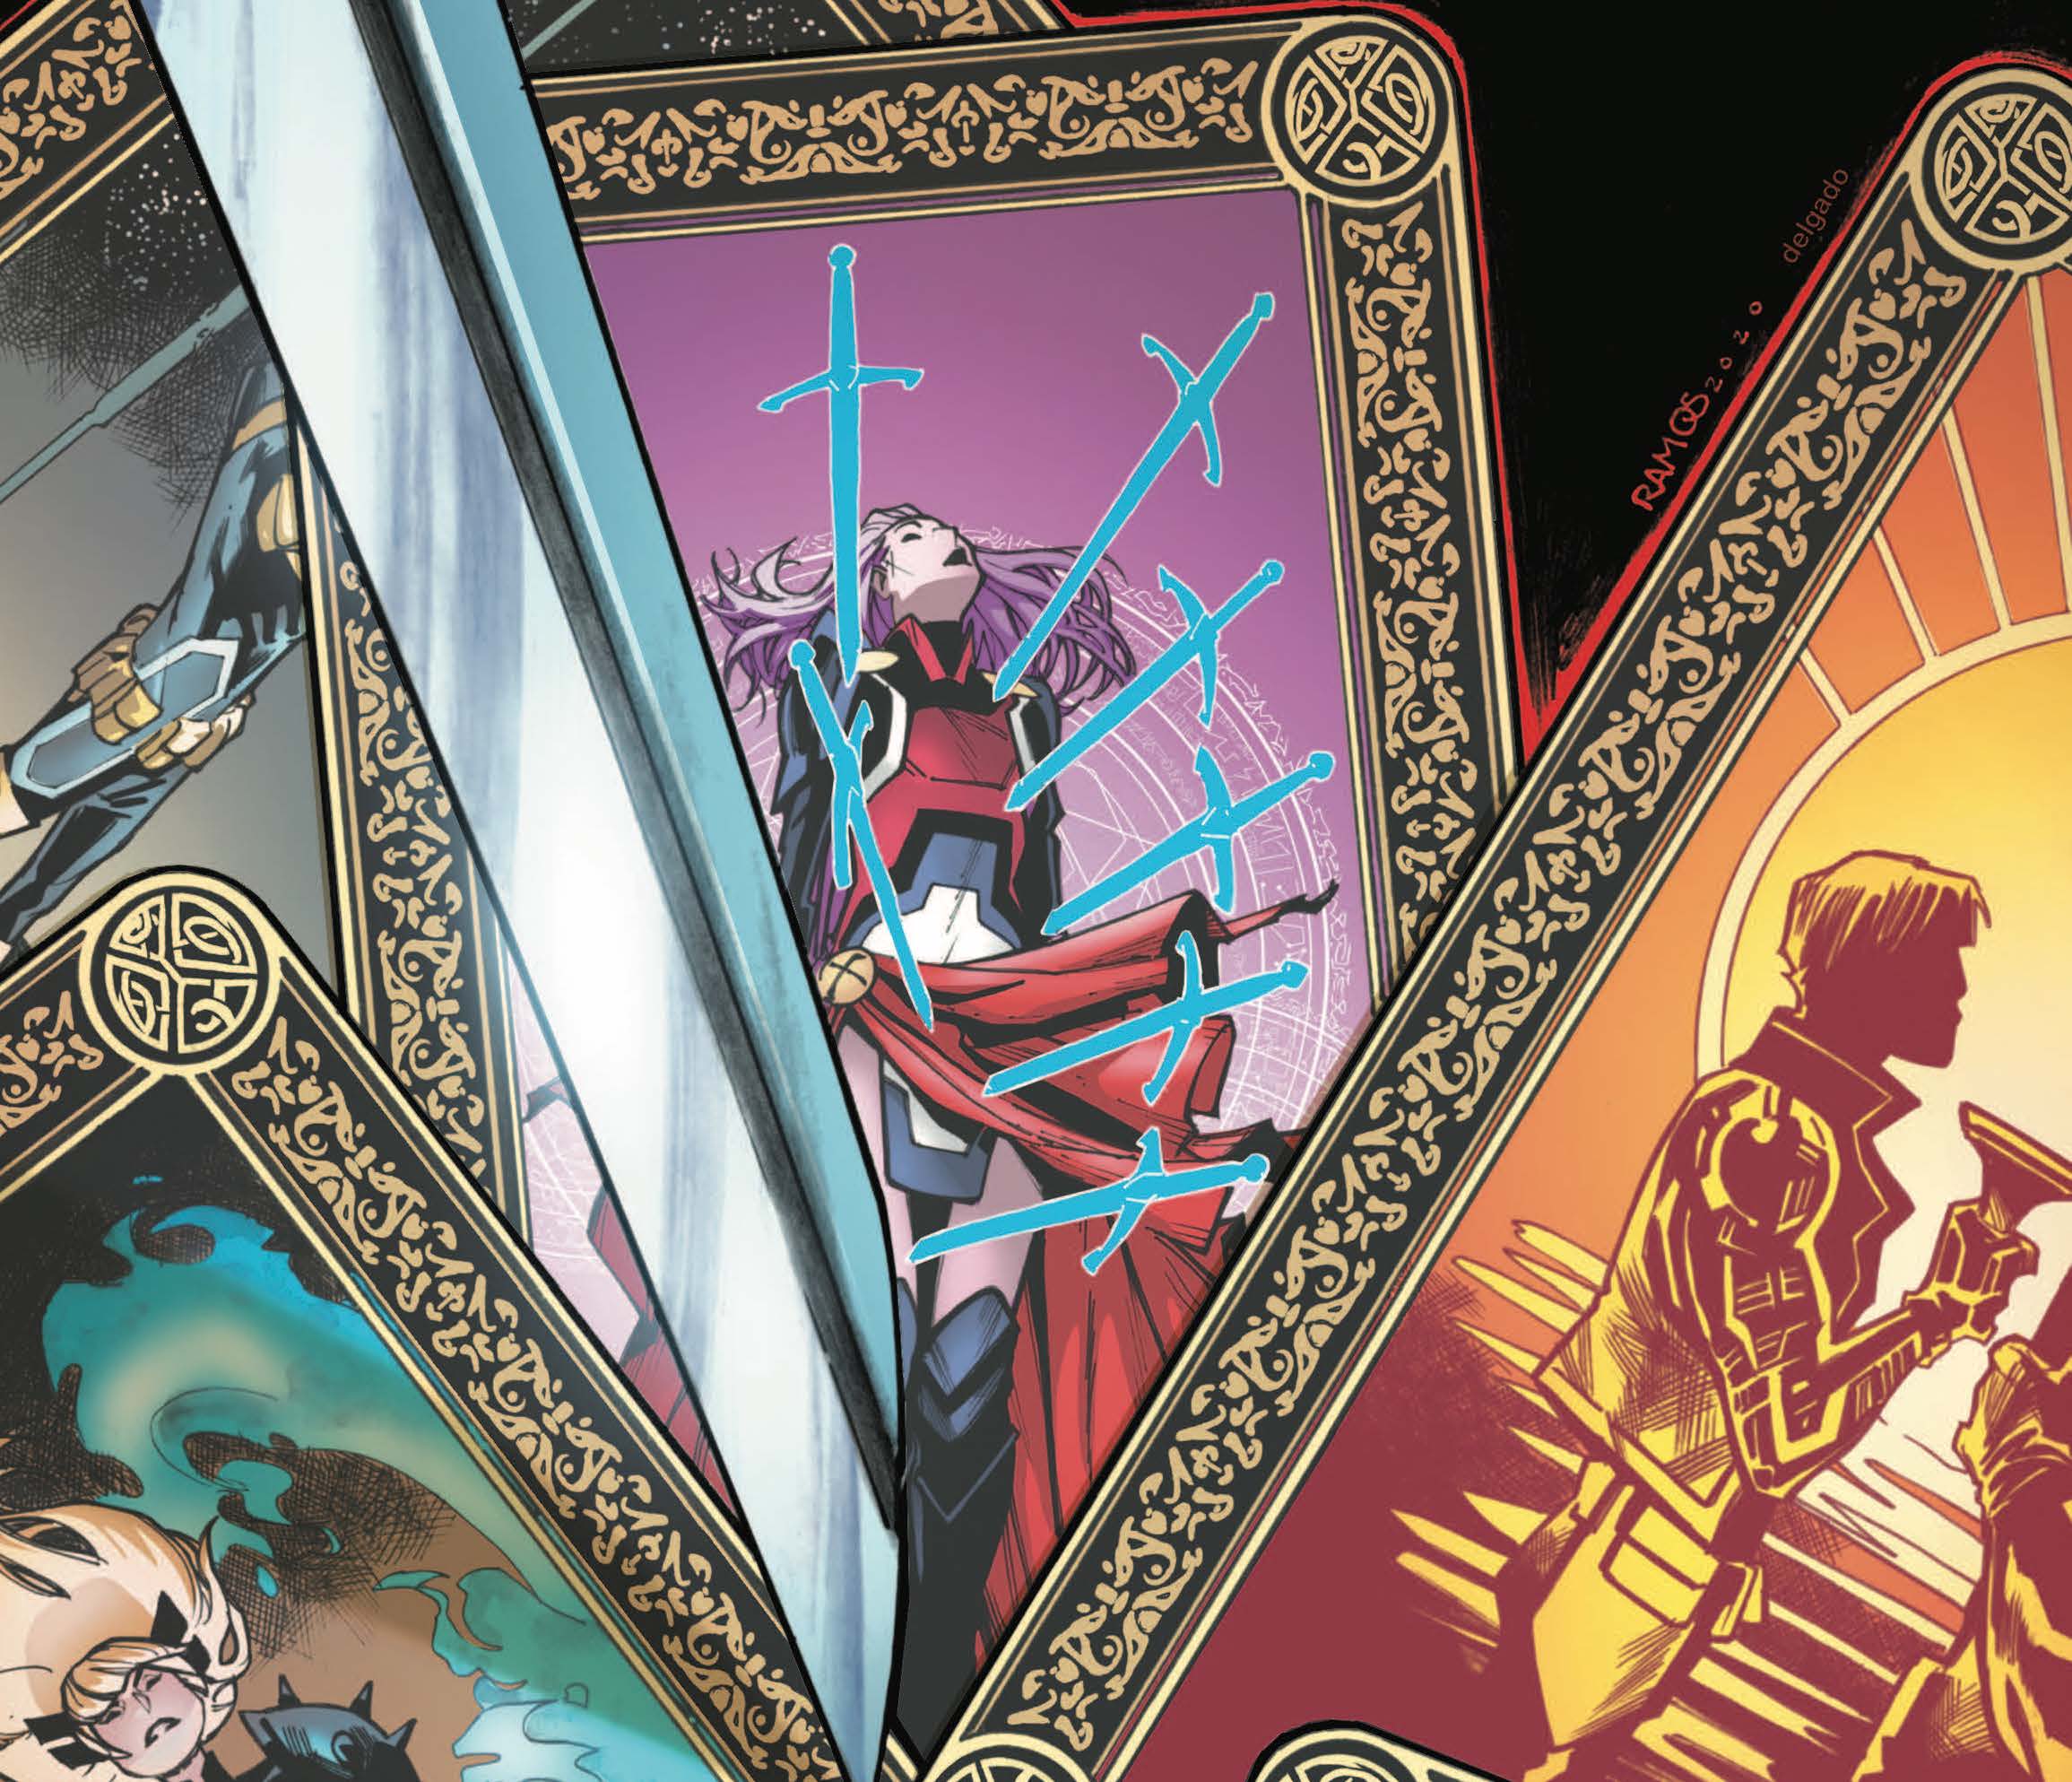 Marvel First Look: X of Swords: Stasis #1 variant cover shows us the tarot cards